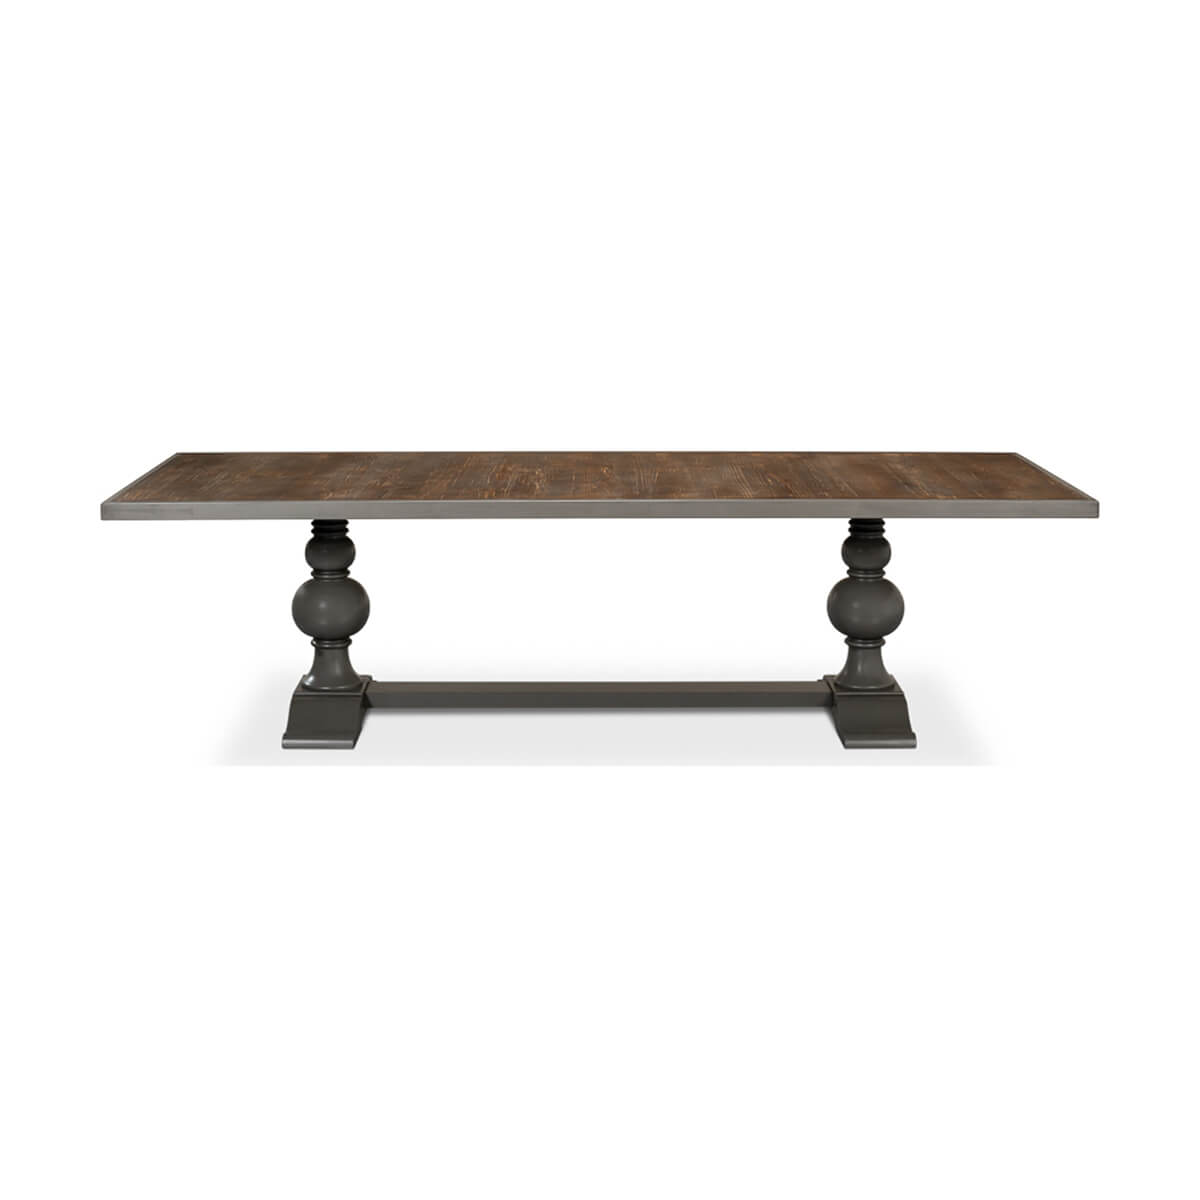 Gray Painted Baroque Style Dining Table - English Georgian America